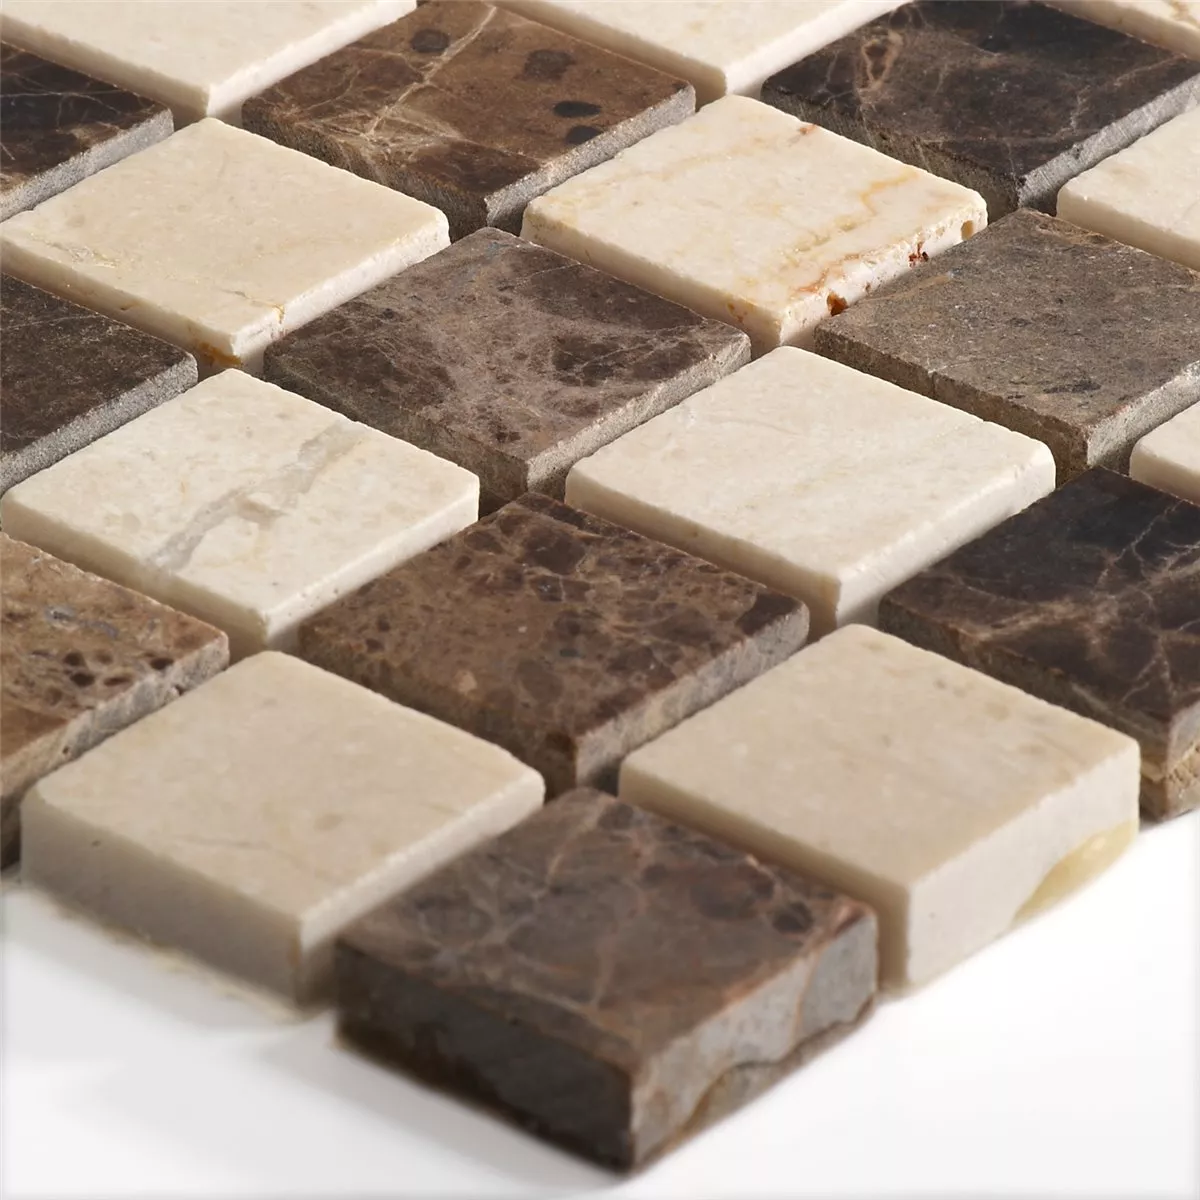 Sample Mosaic Tiles Natural Stone Marble Beige Brown Mix